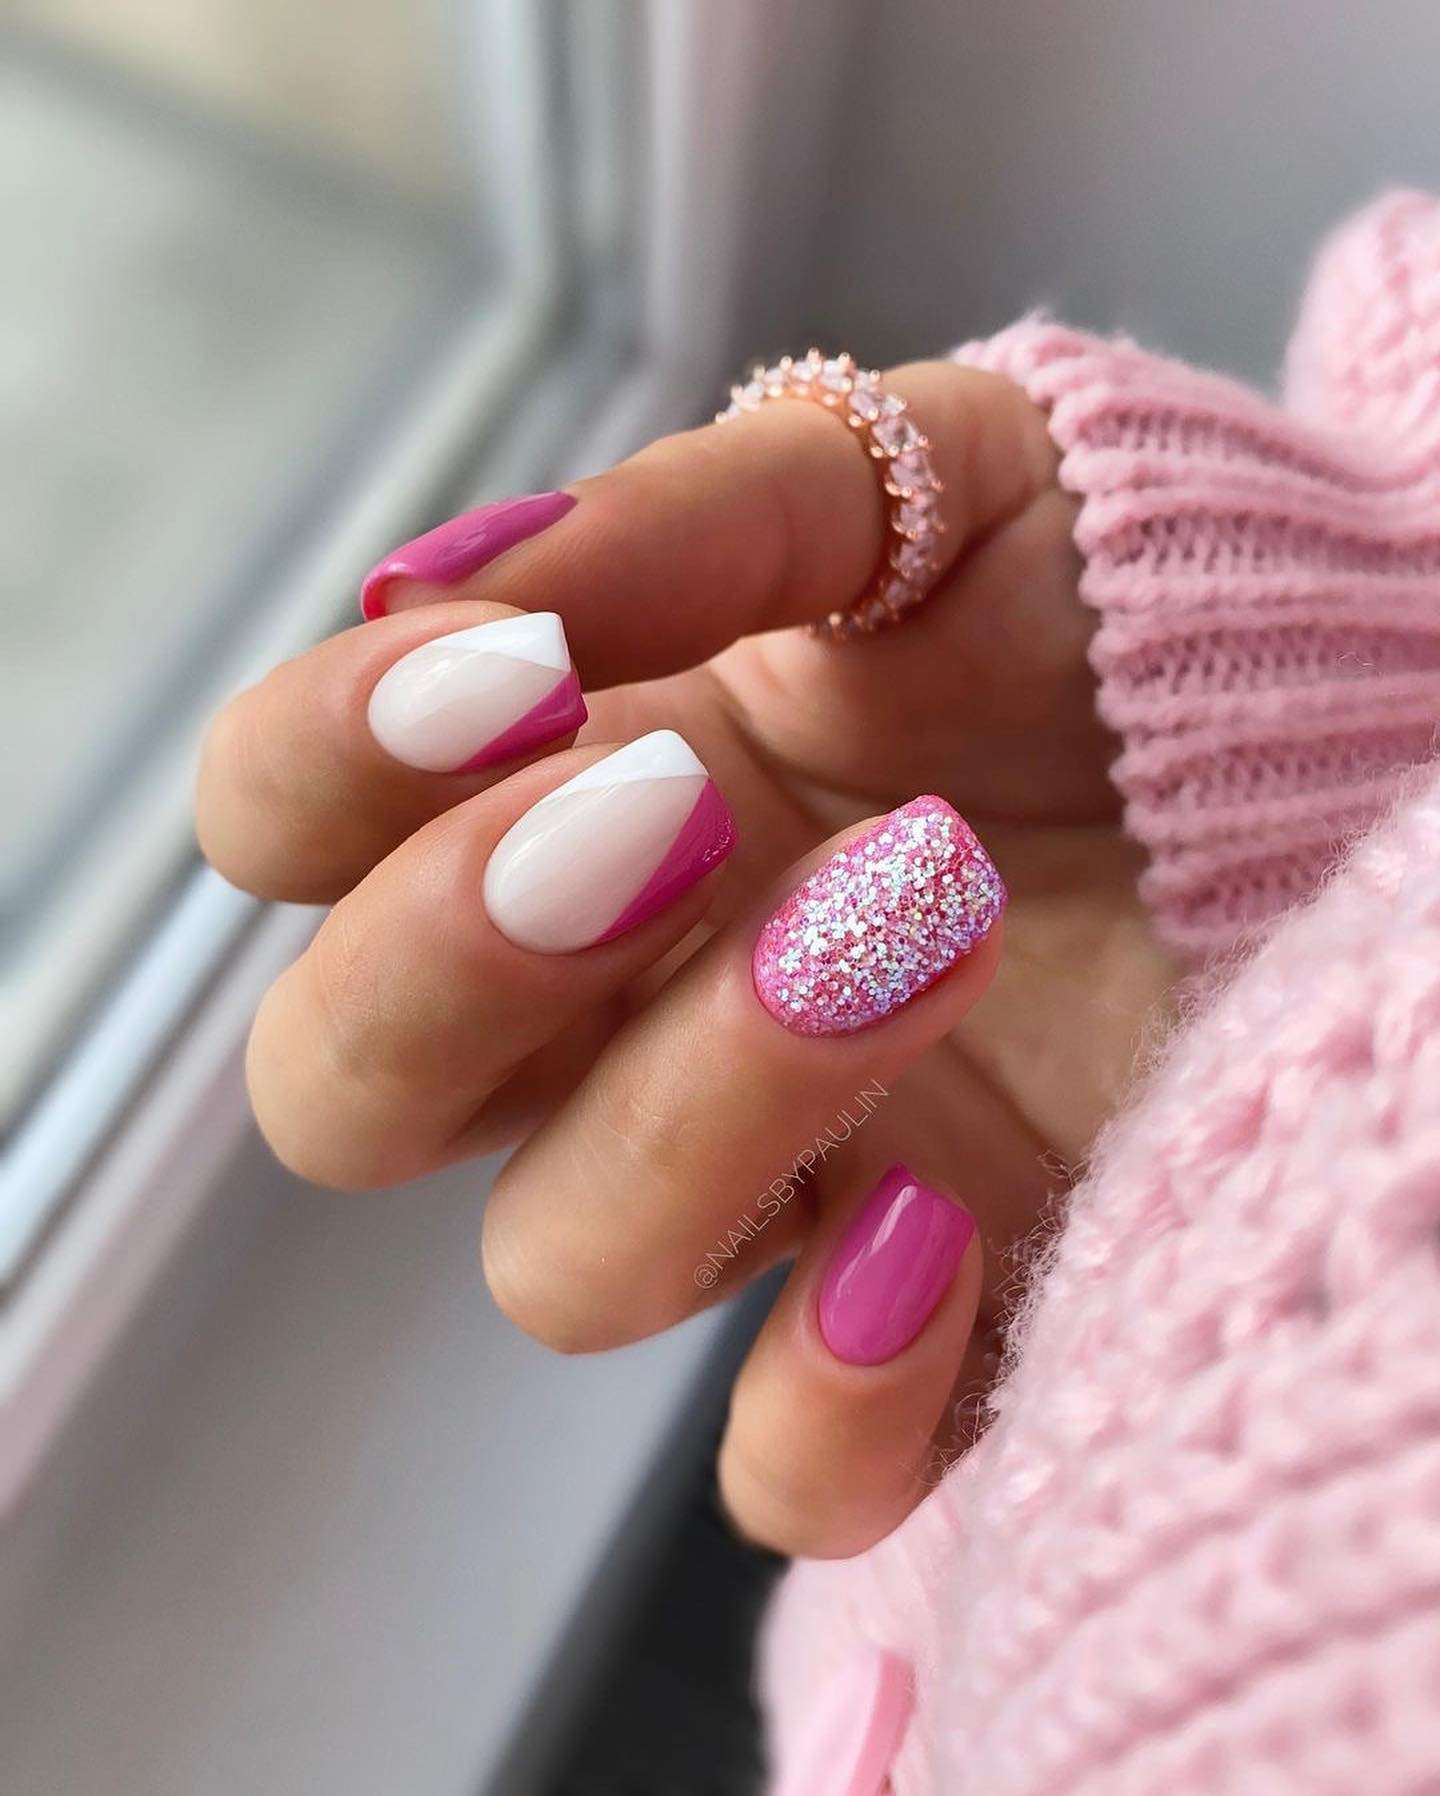 35 Nail Designs For 2022 You’ll Want To Try Immediately images 32